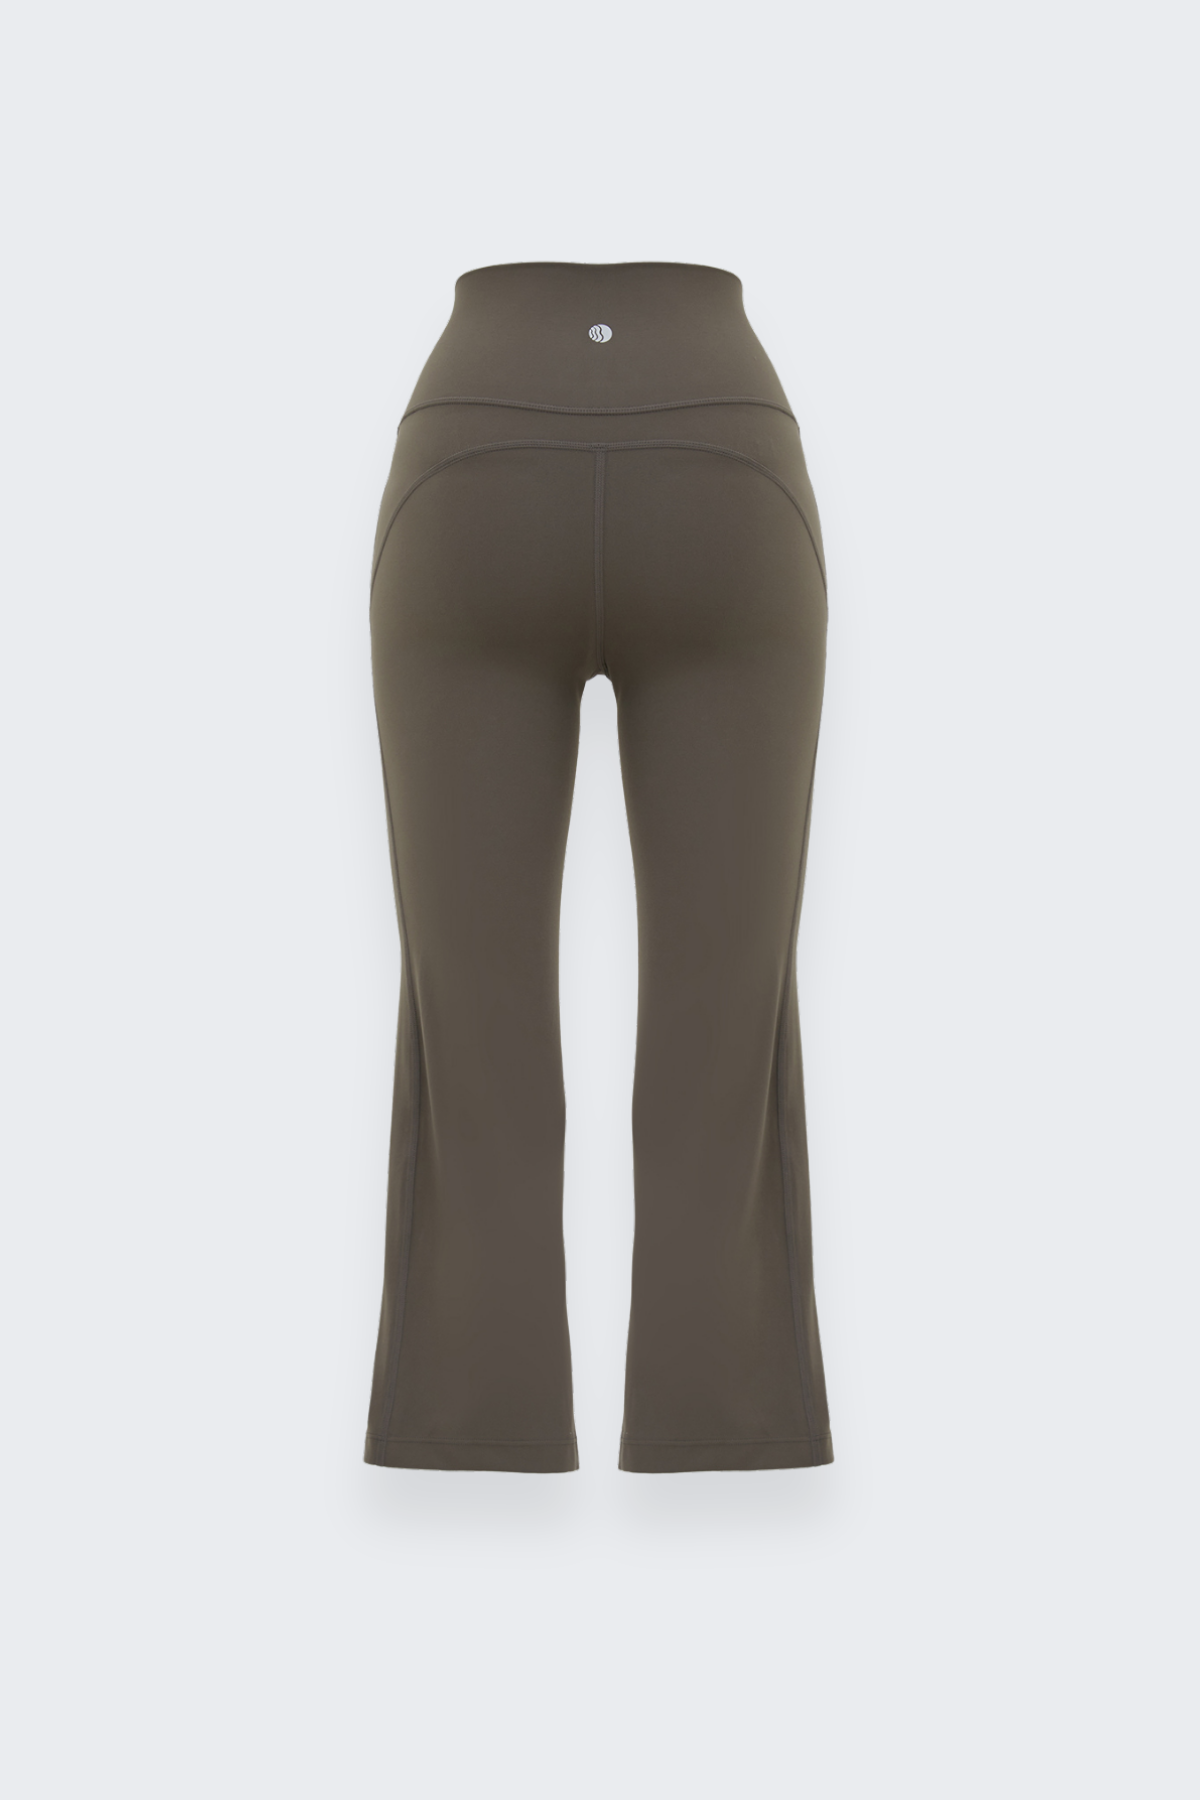 Clarity Flare Pants In Taupe (5 LEFT)